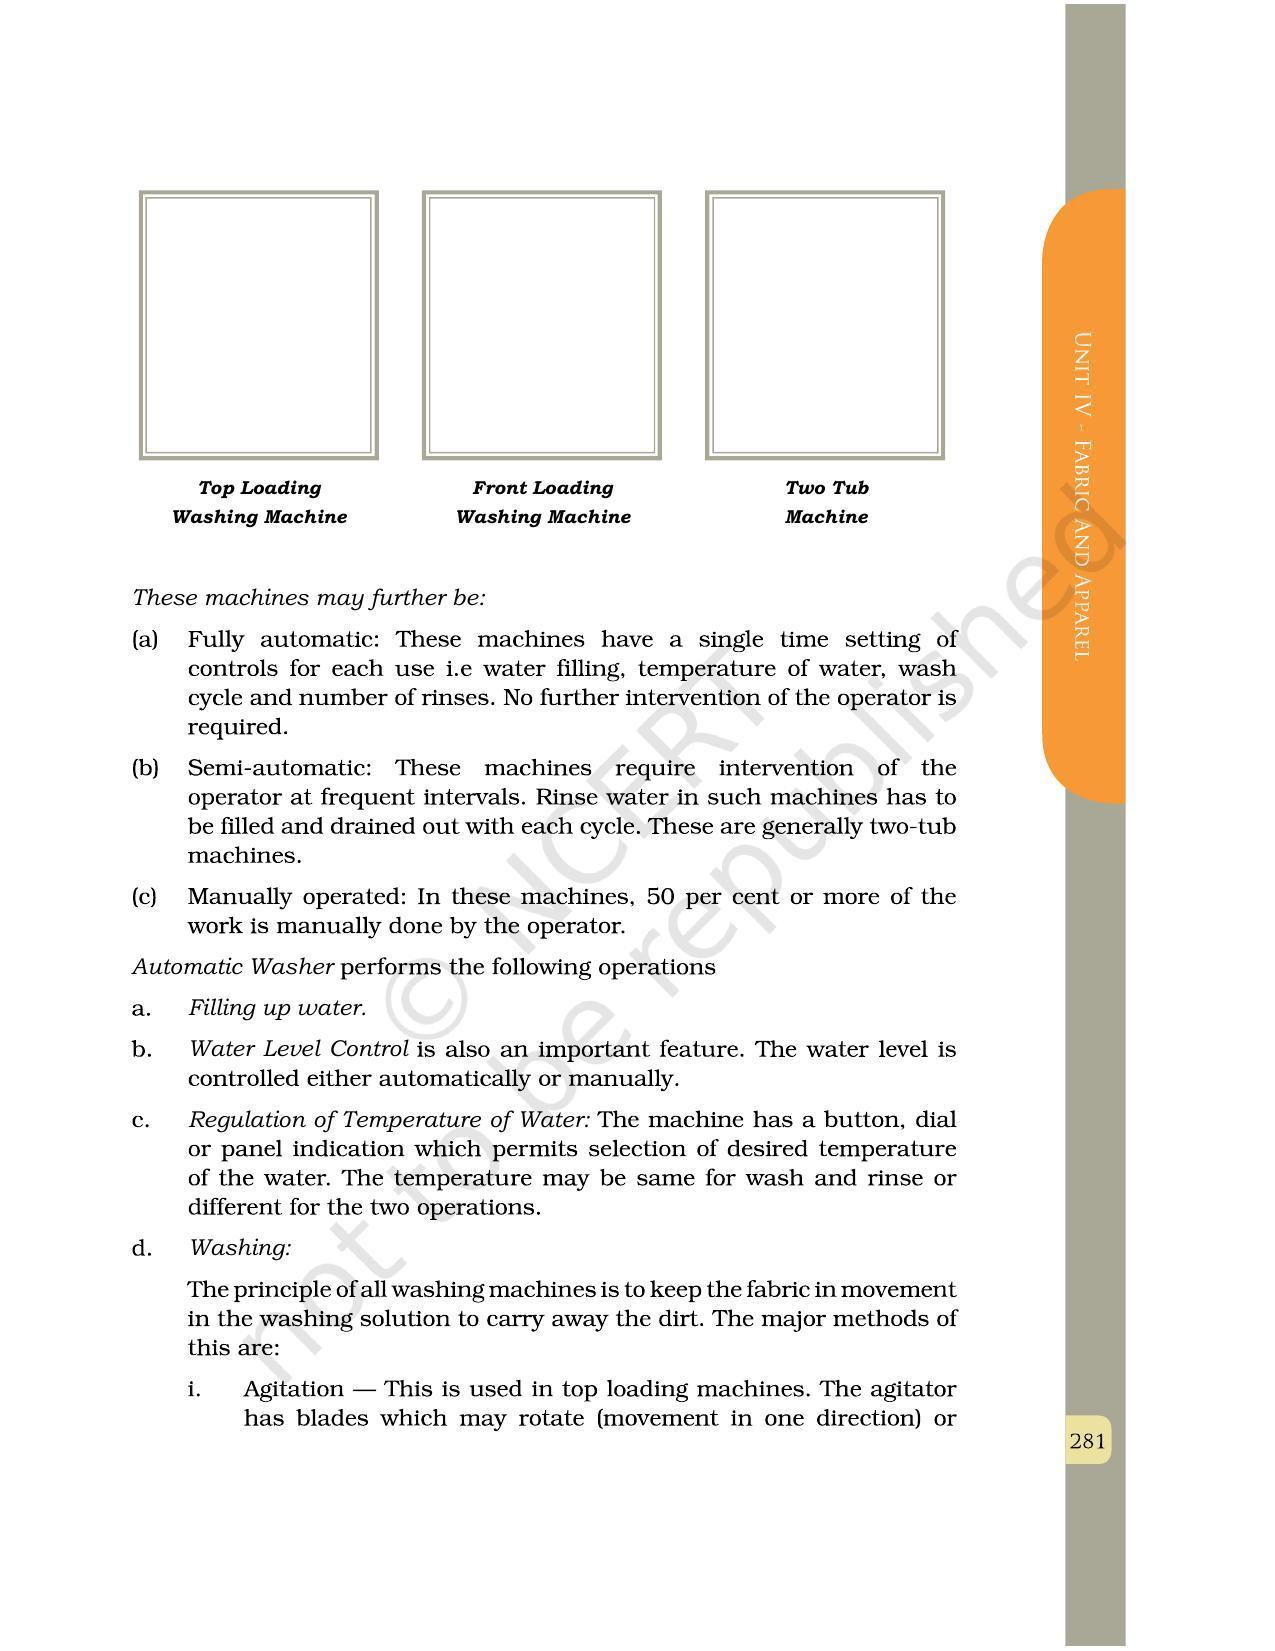 NCERT Book for Class 12 Home Science (Part -II) Chapter 15 Care and Maintenance of Fabrics in Institutions - Page 3